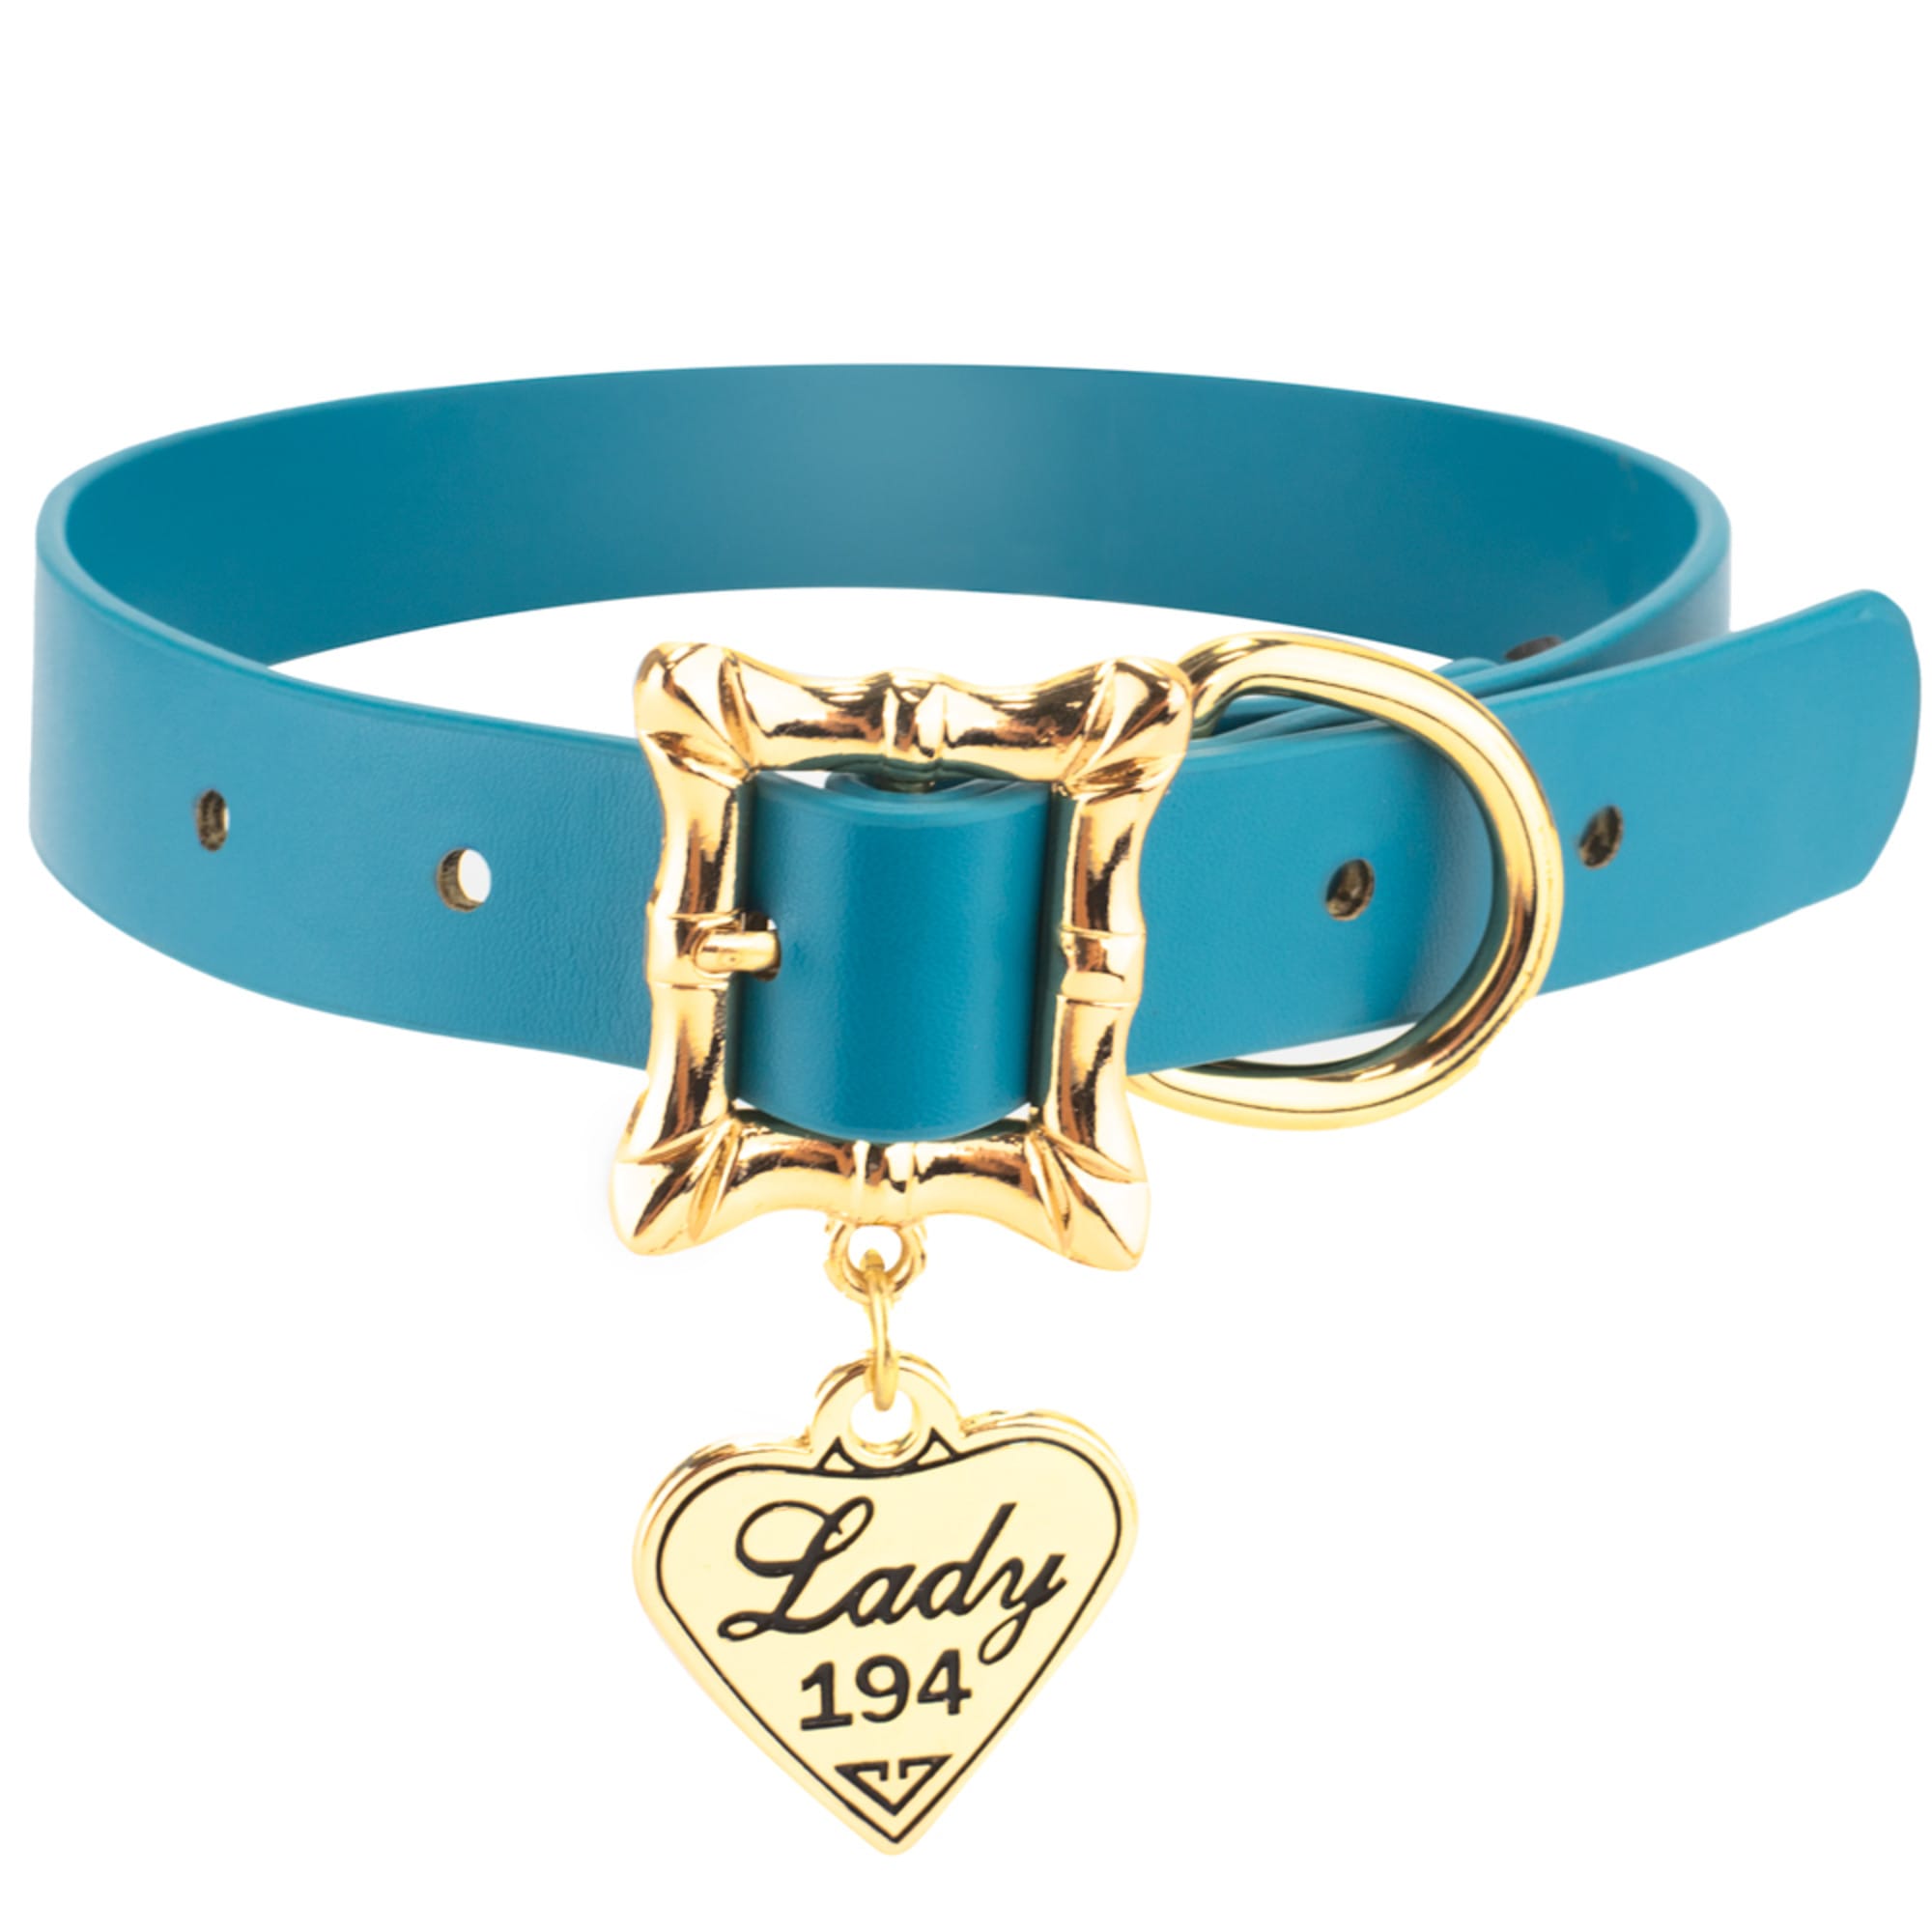 Photos - Collar / Harnesses Buckle-Down Vegan Leather Dog Collar, Disney Lady and The Tram 